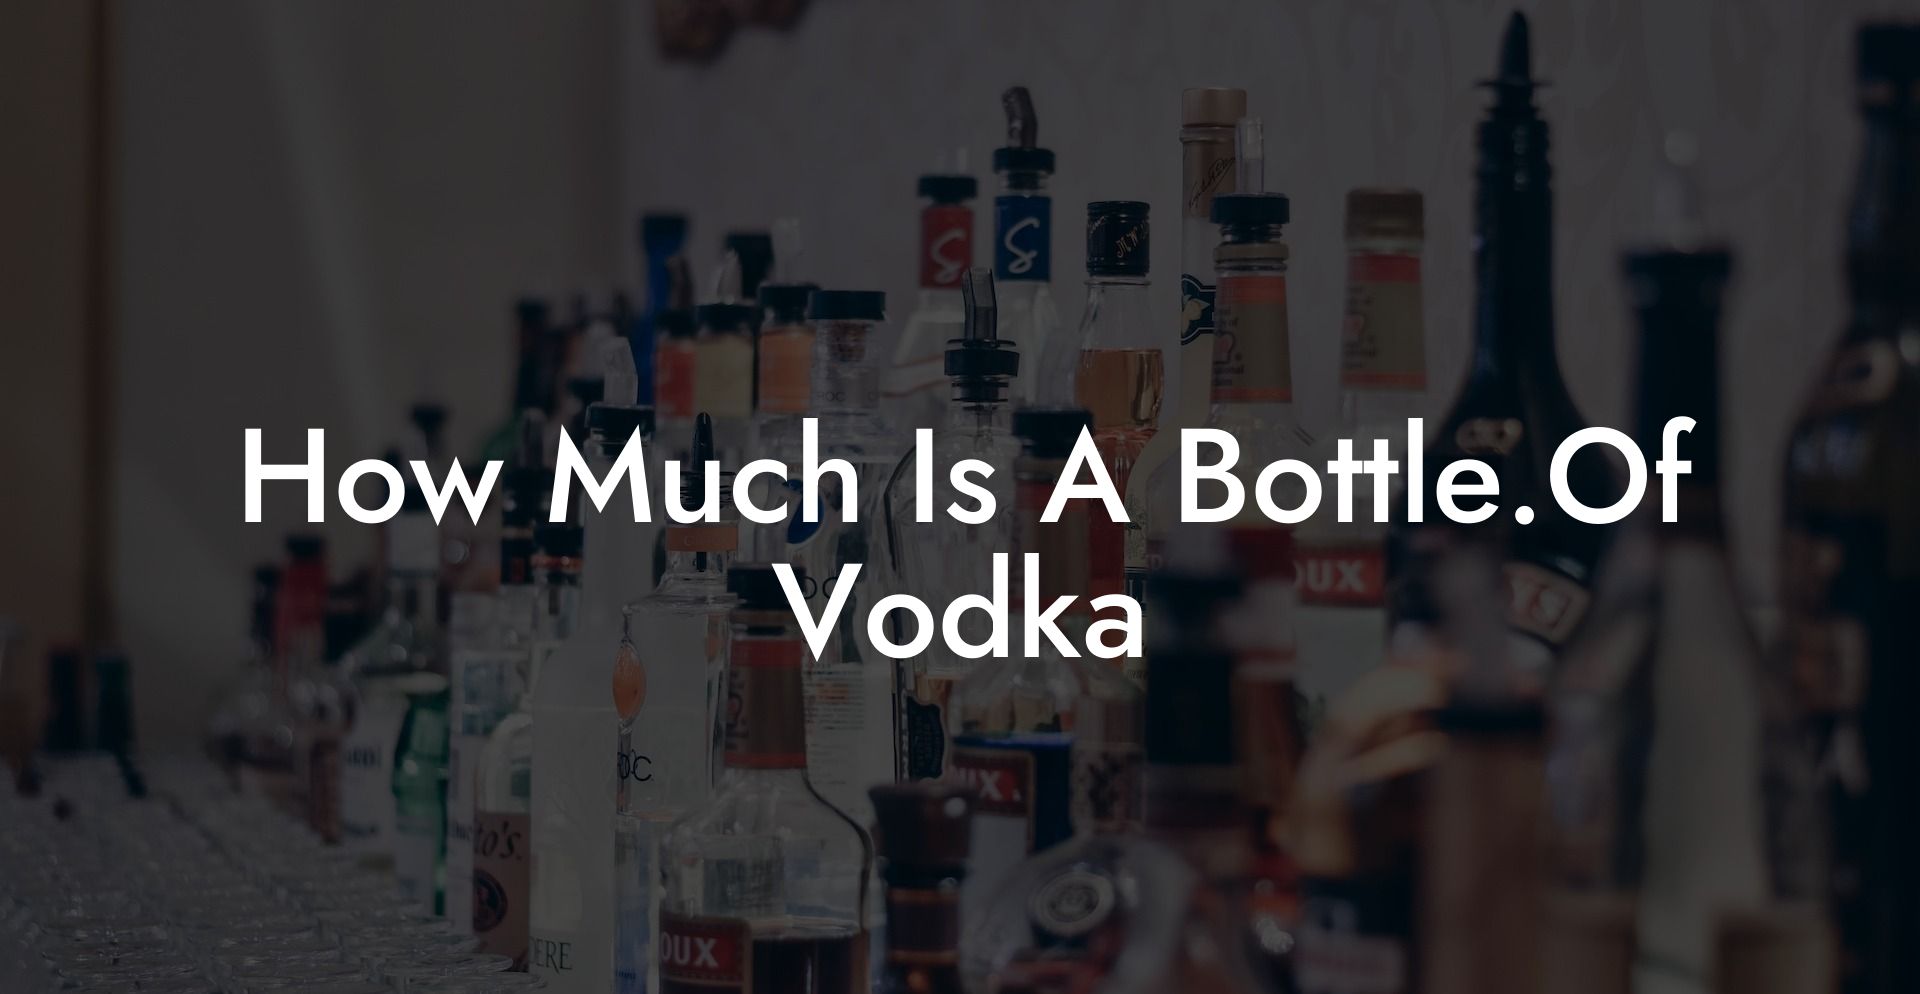 How Much Is A Bottle.Of Vodka